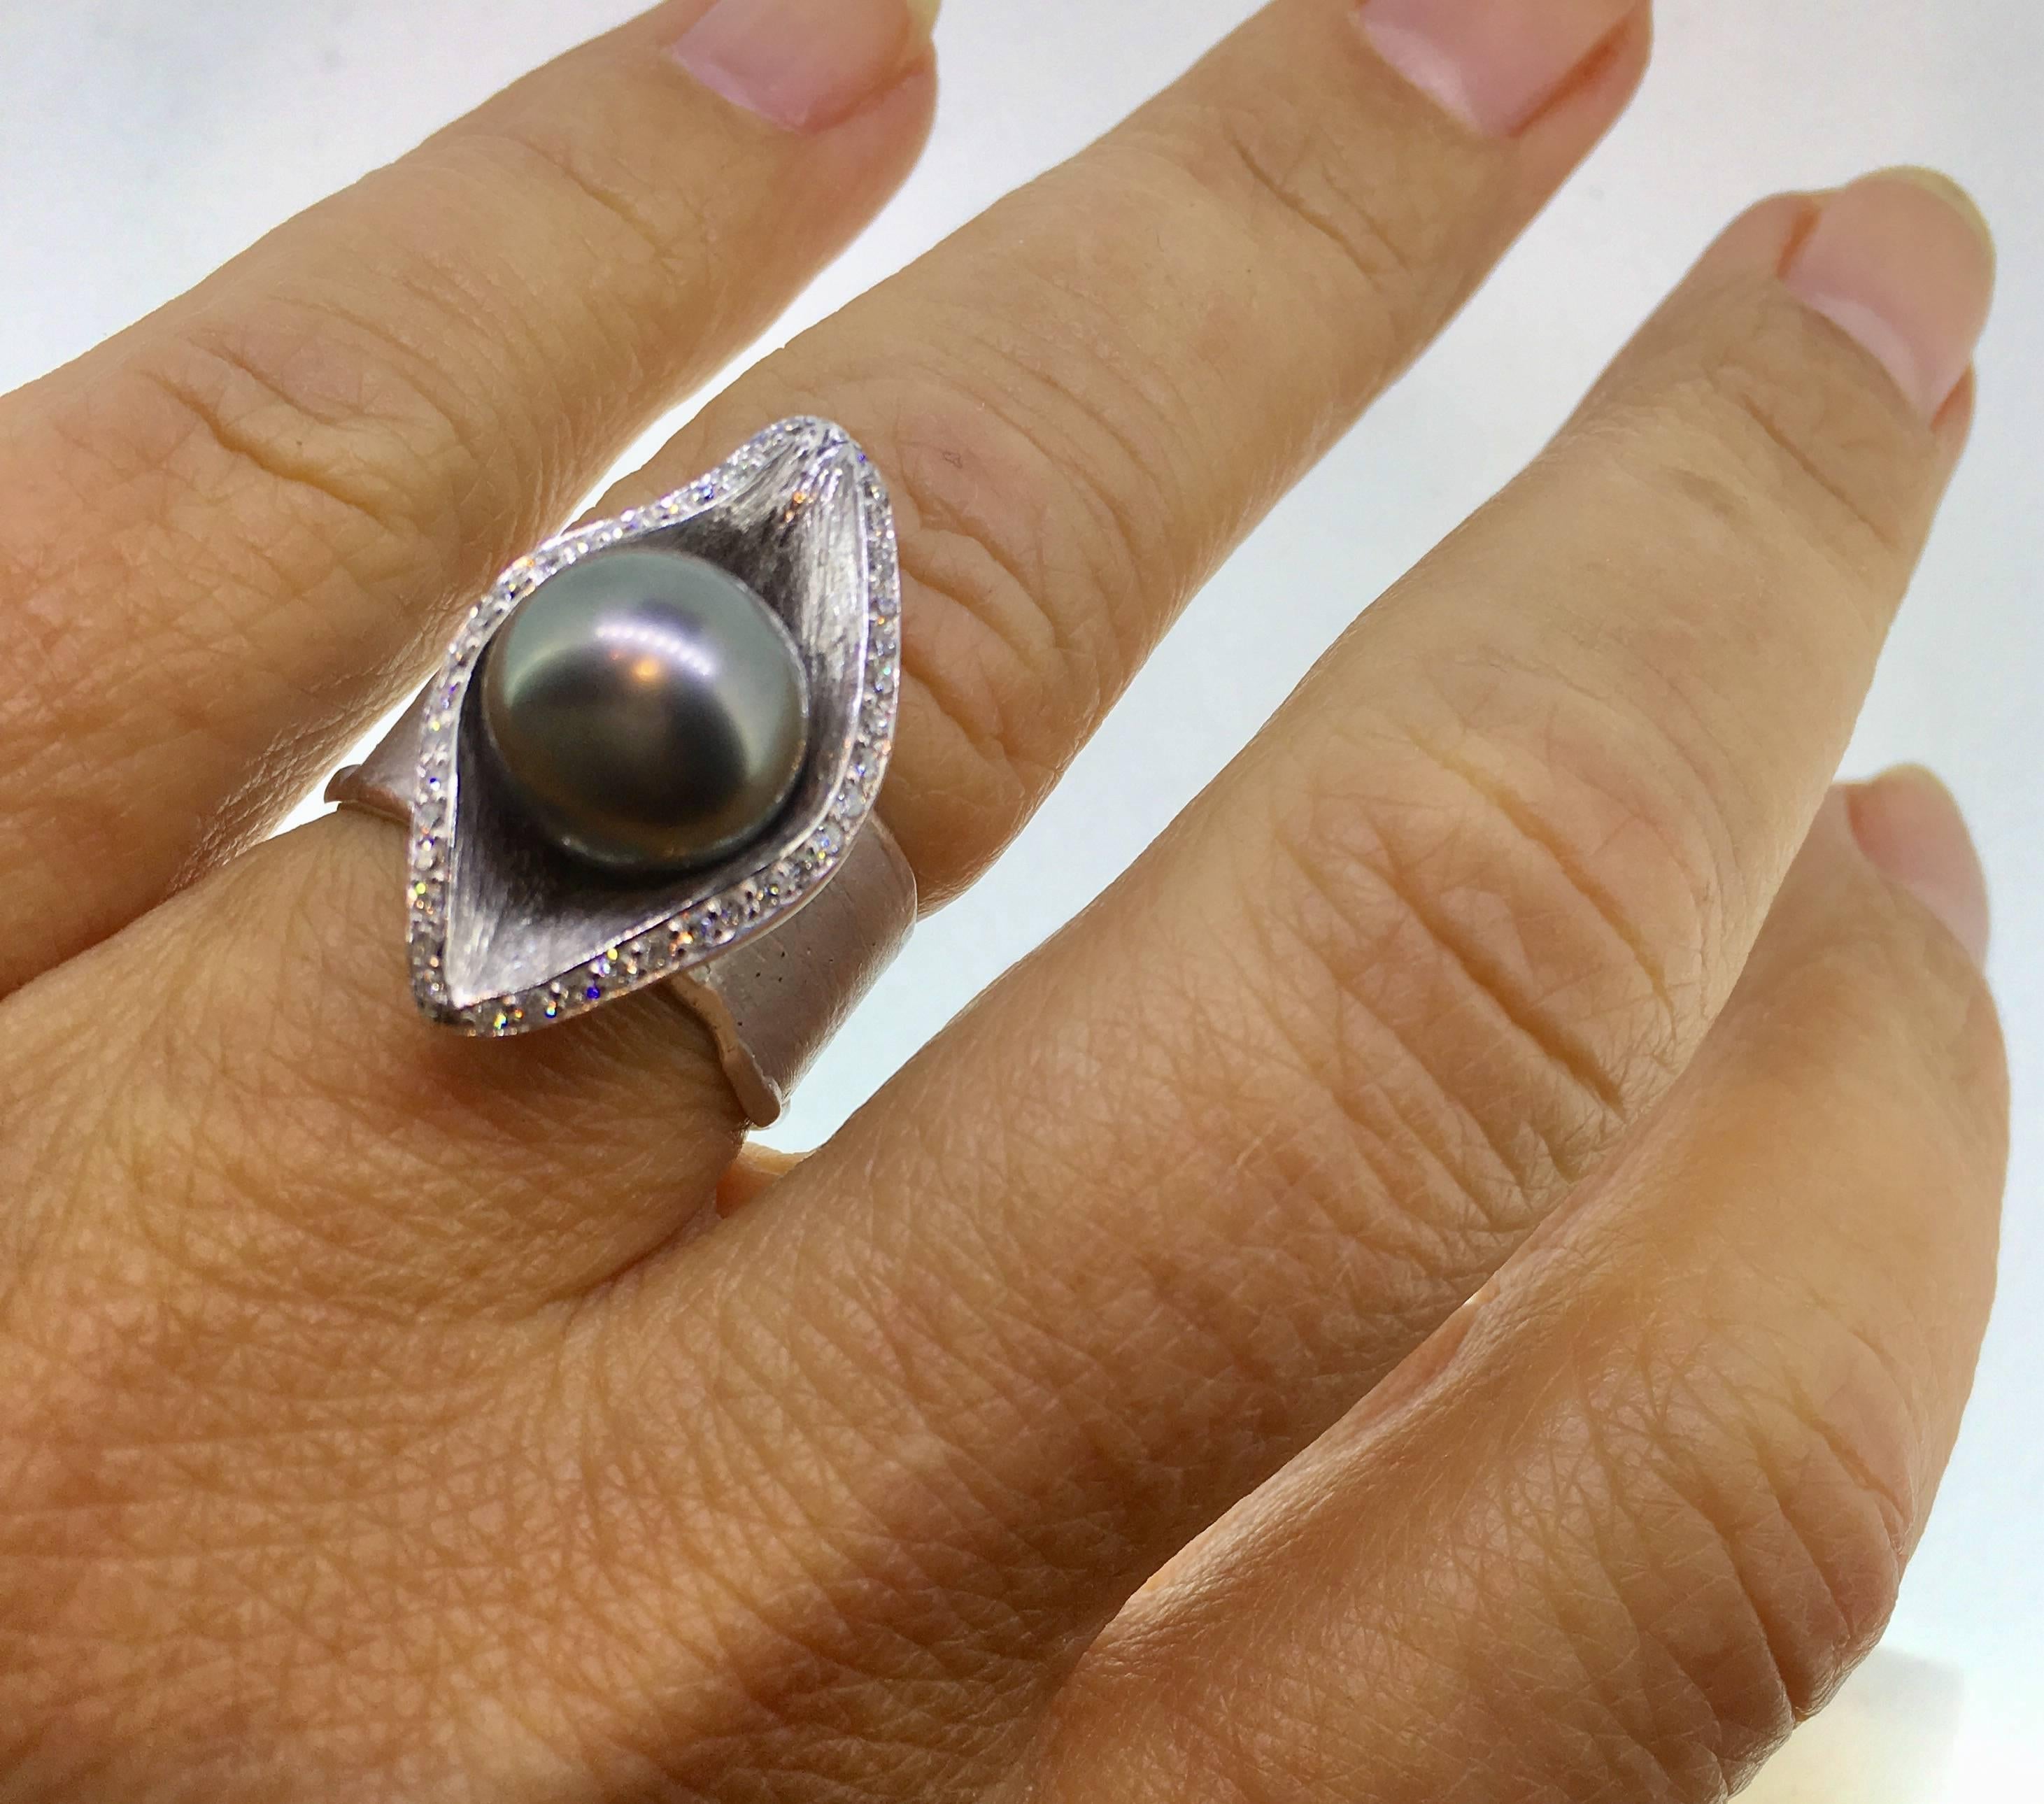 S. Van Giel Diamonds and Grey Pearl Modern Ring For Sale 1